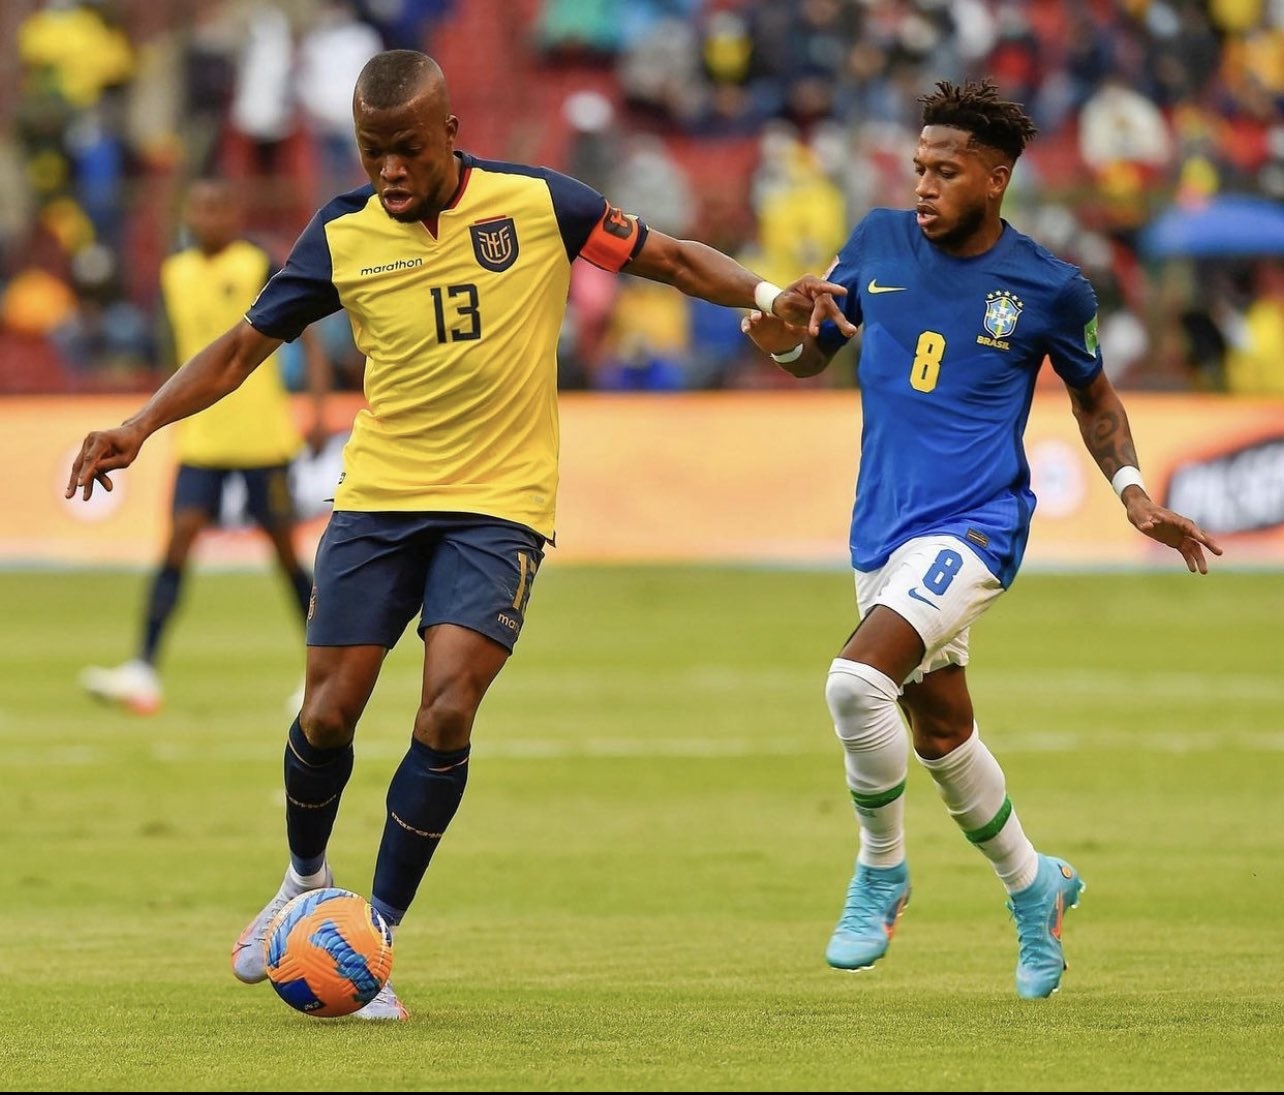 Enner Valancia has been named in the Ecuador squad for World Cup 2022 in Qatar